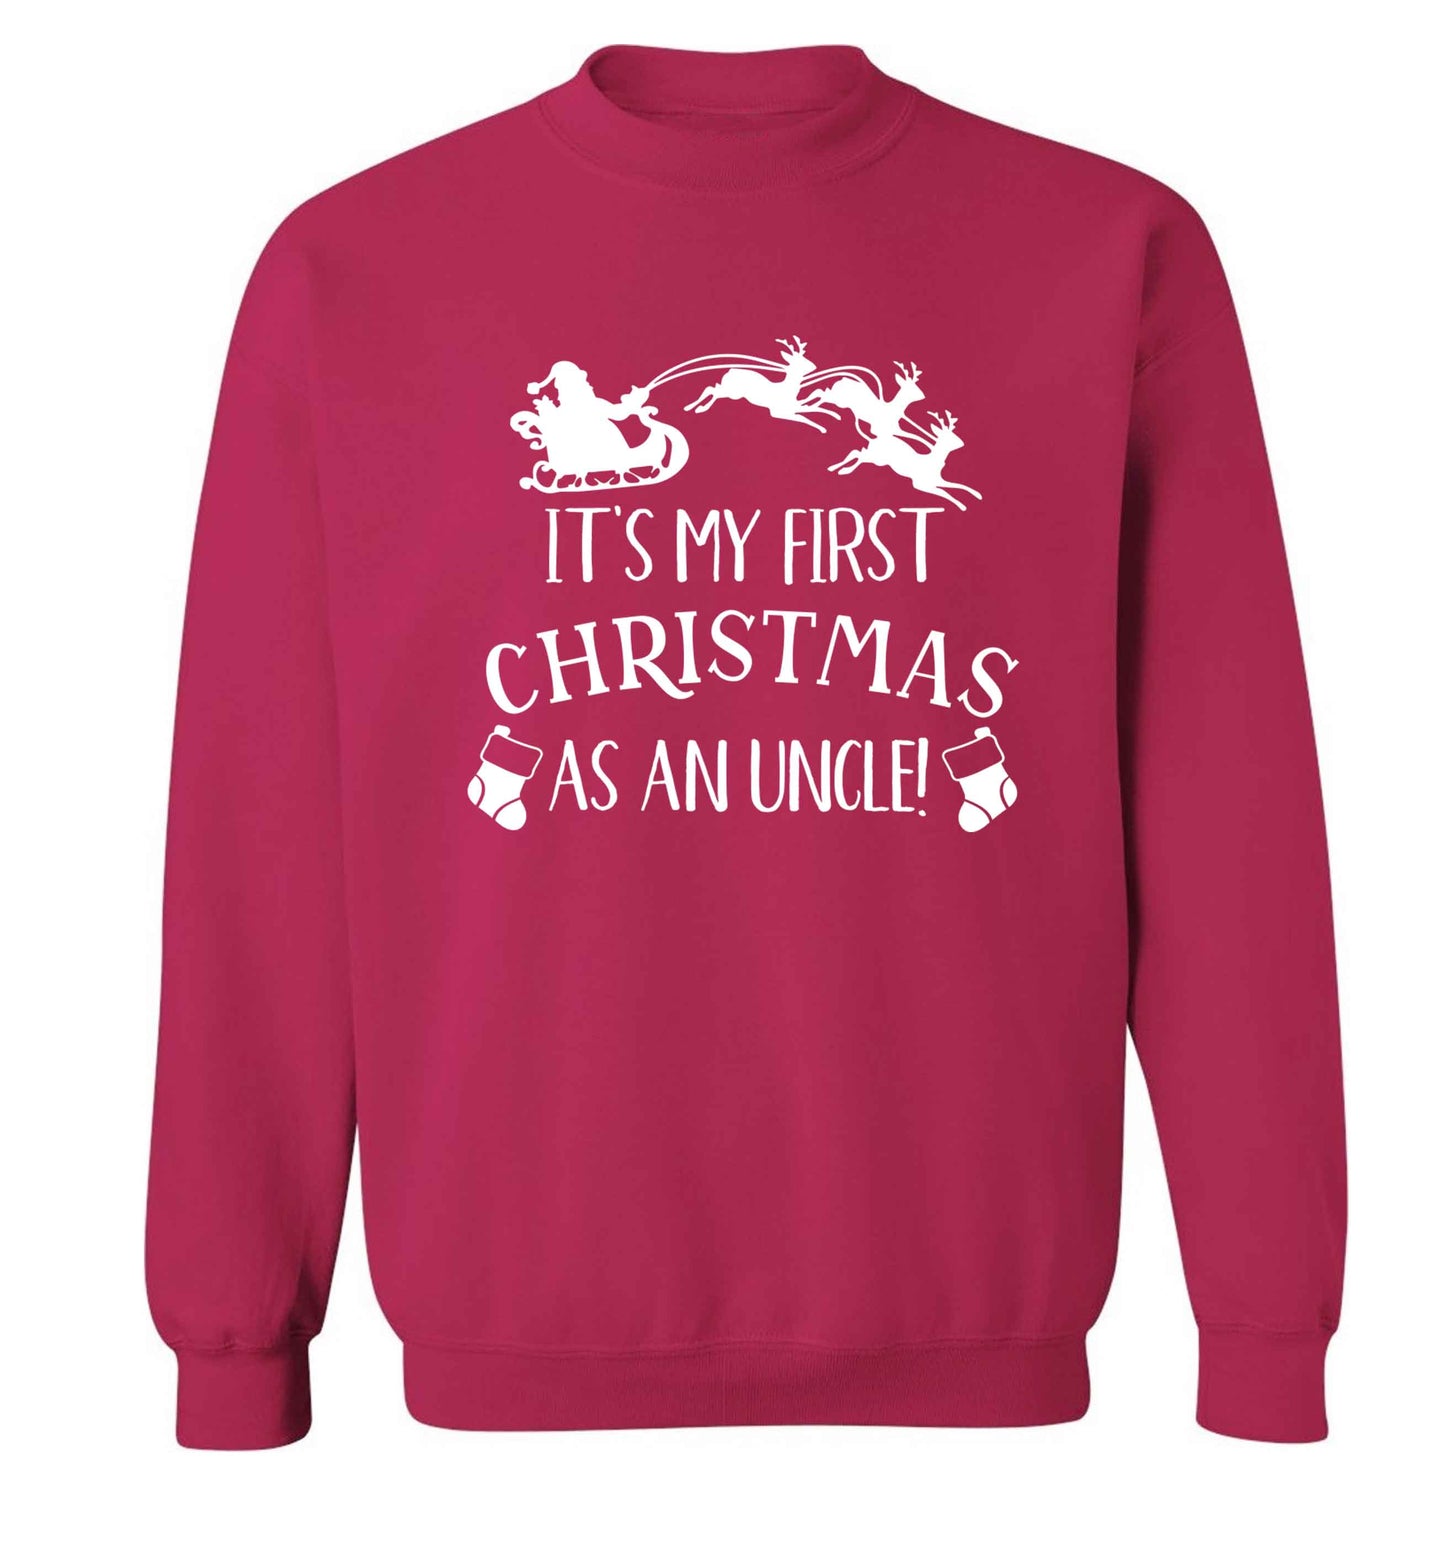 It's my first Christmas as an uncle! Adult's unisex pink Sweater 2XL